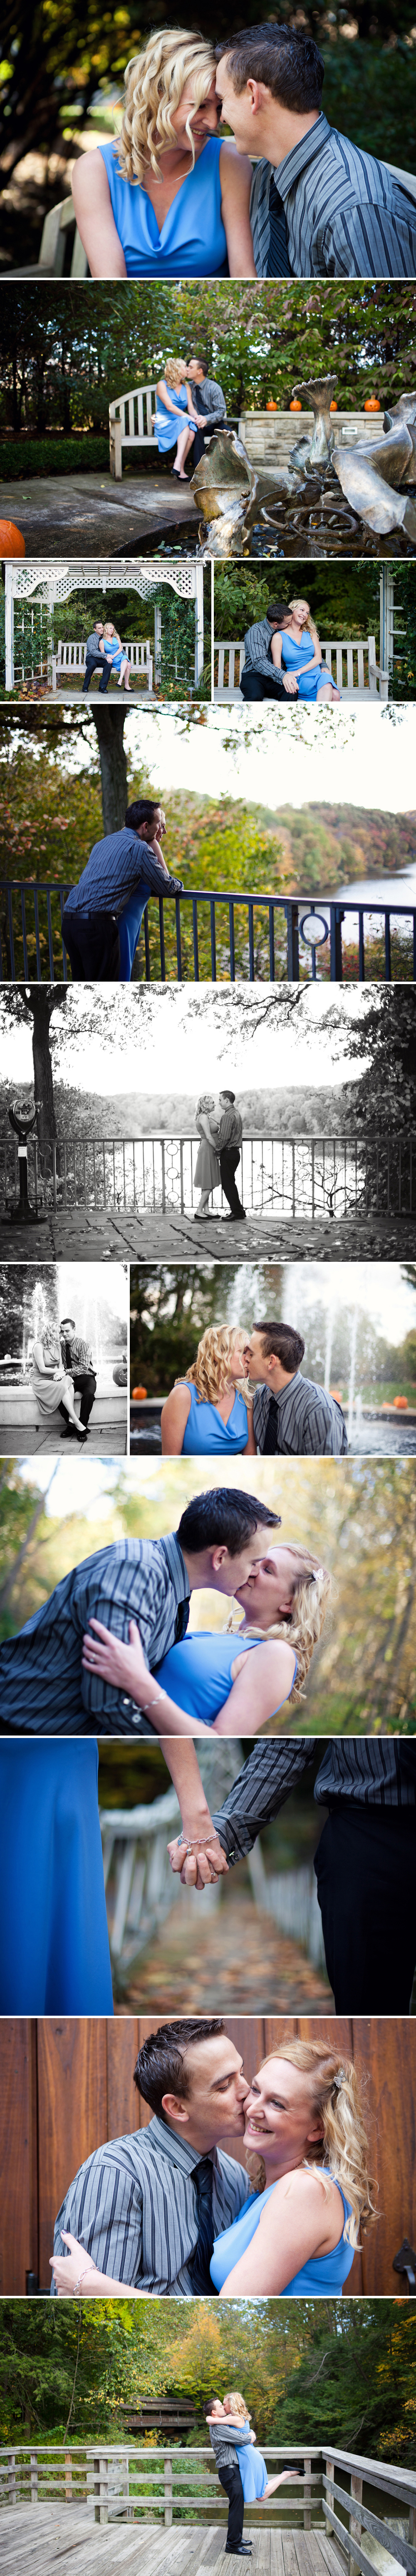 Megan + Bryan | Youngstown, OH Engagement Photographer | MMGPhotography